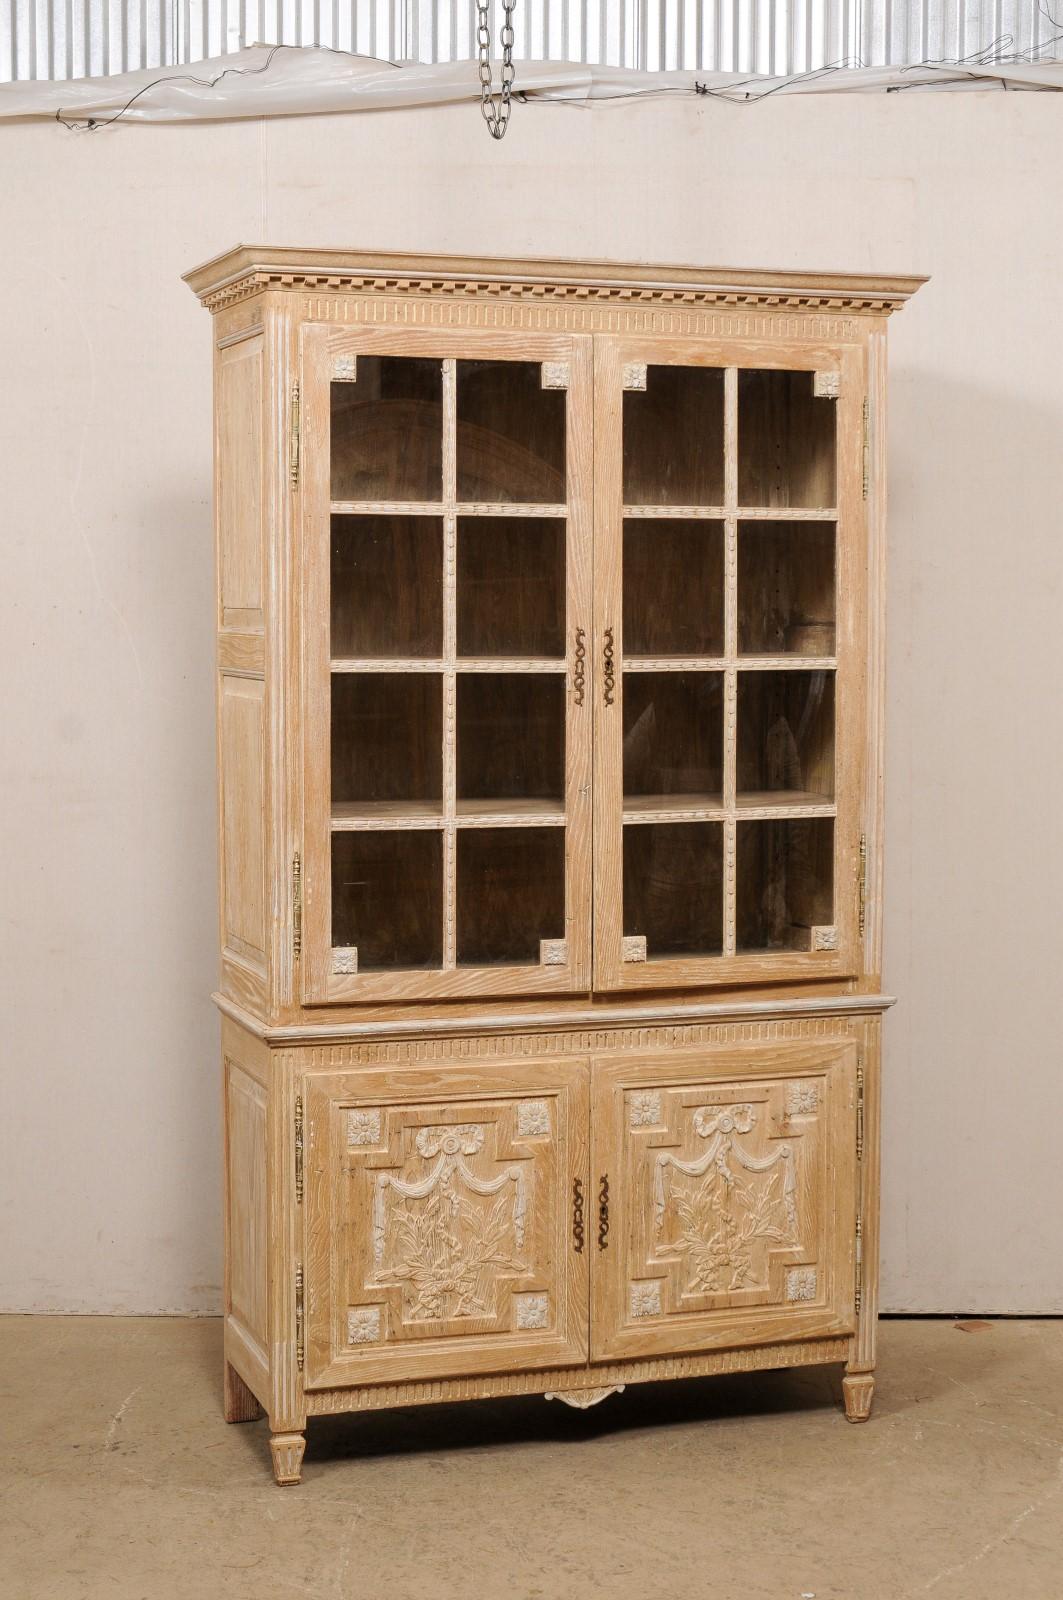 A French tall display and storage cabinet from the mid 20th century. This vintage cabinet from France, which stands approximately 7.5 ft tall, has been designed with a Neoclassical influence, which is apparent in the nice dentil molding found